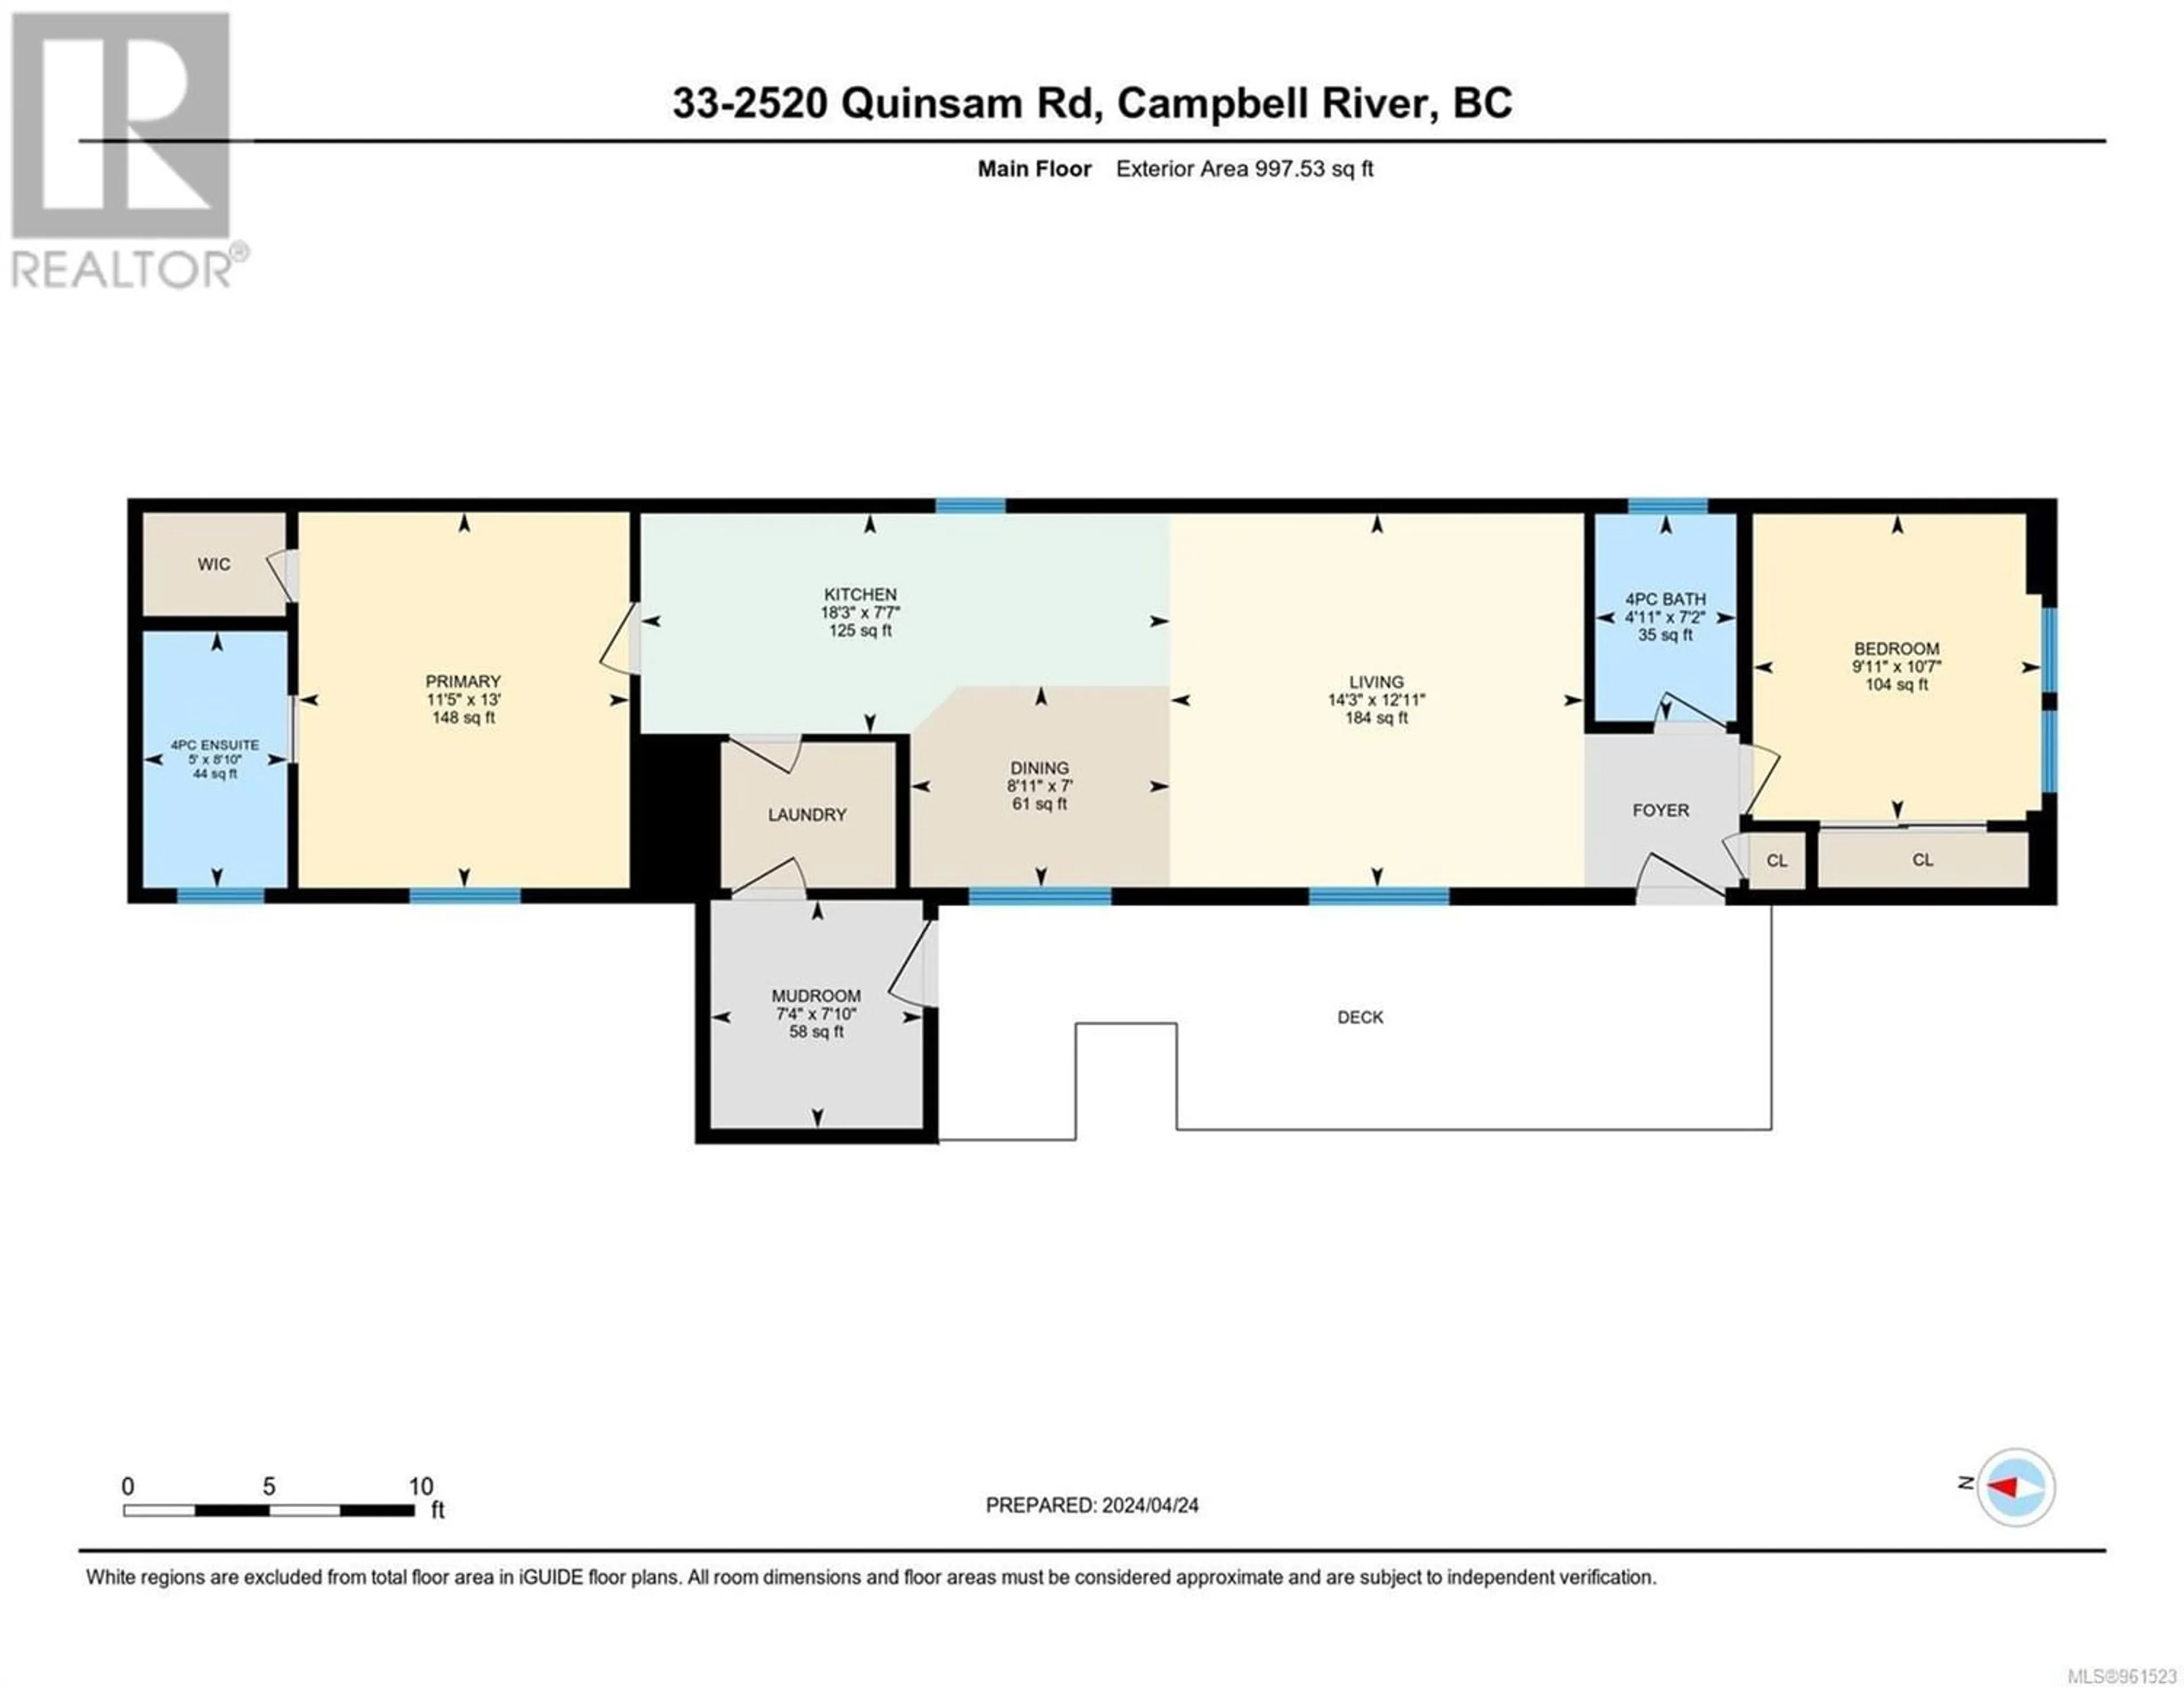 Floor plan for 33 2520 Quinsam Rd, Campbell River British Columbia V9W4N4